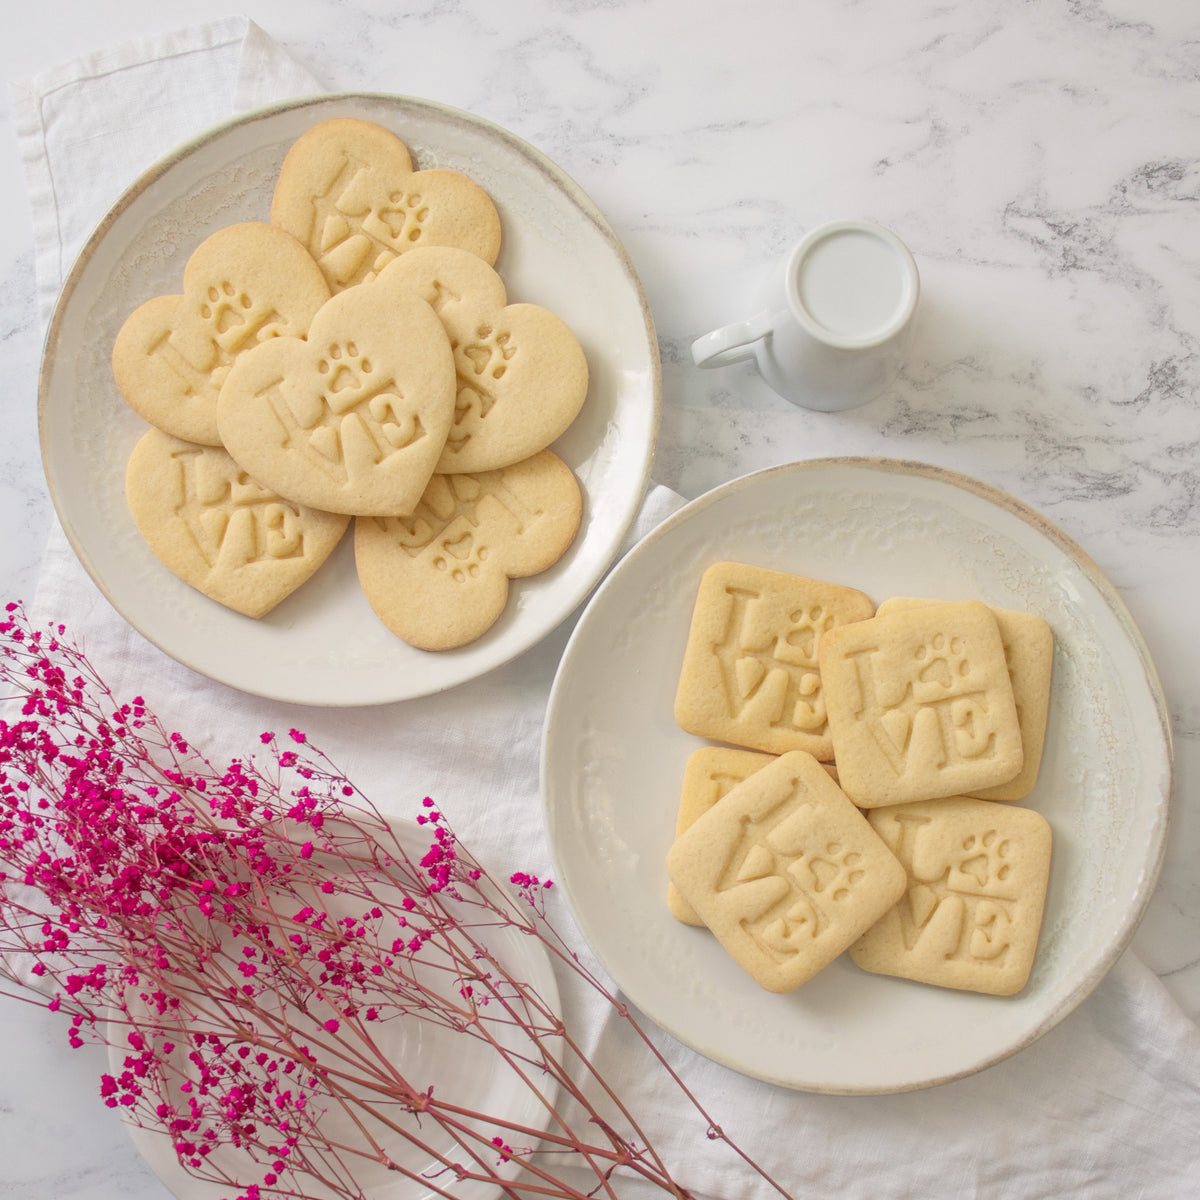 Philly LOVE with Paw Print Cookies (Heart and Square)